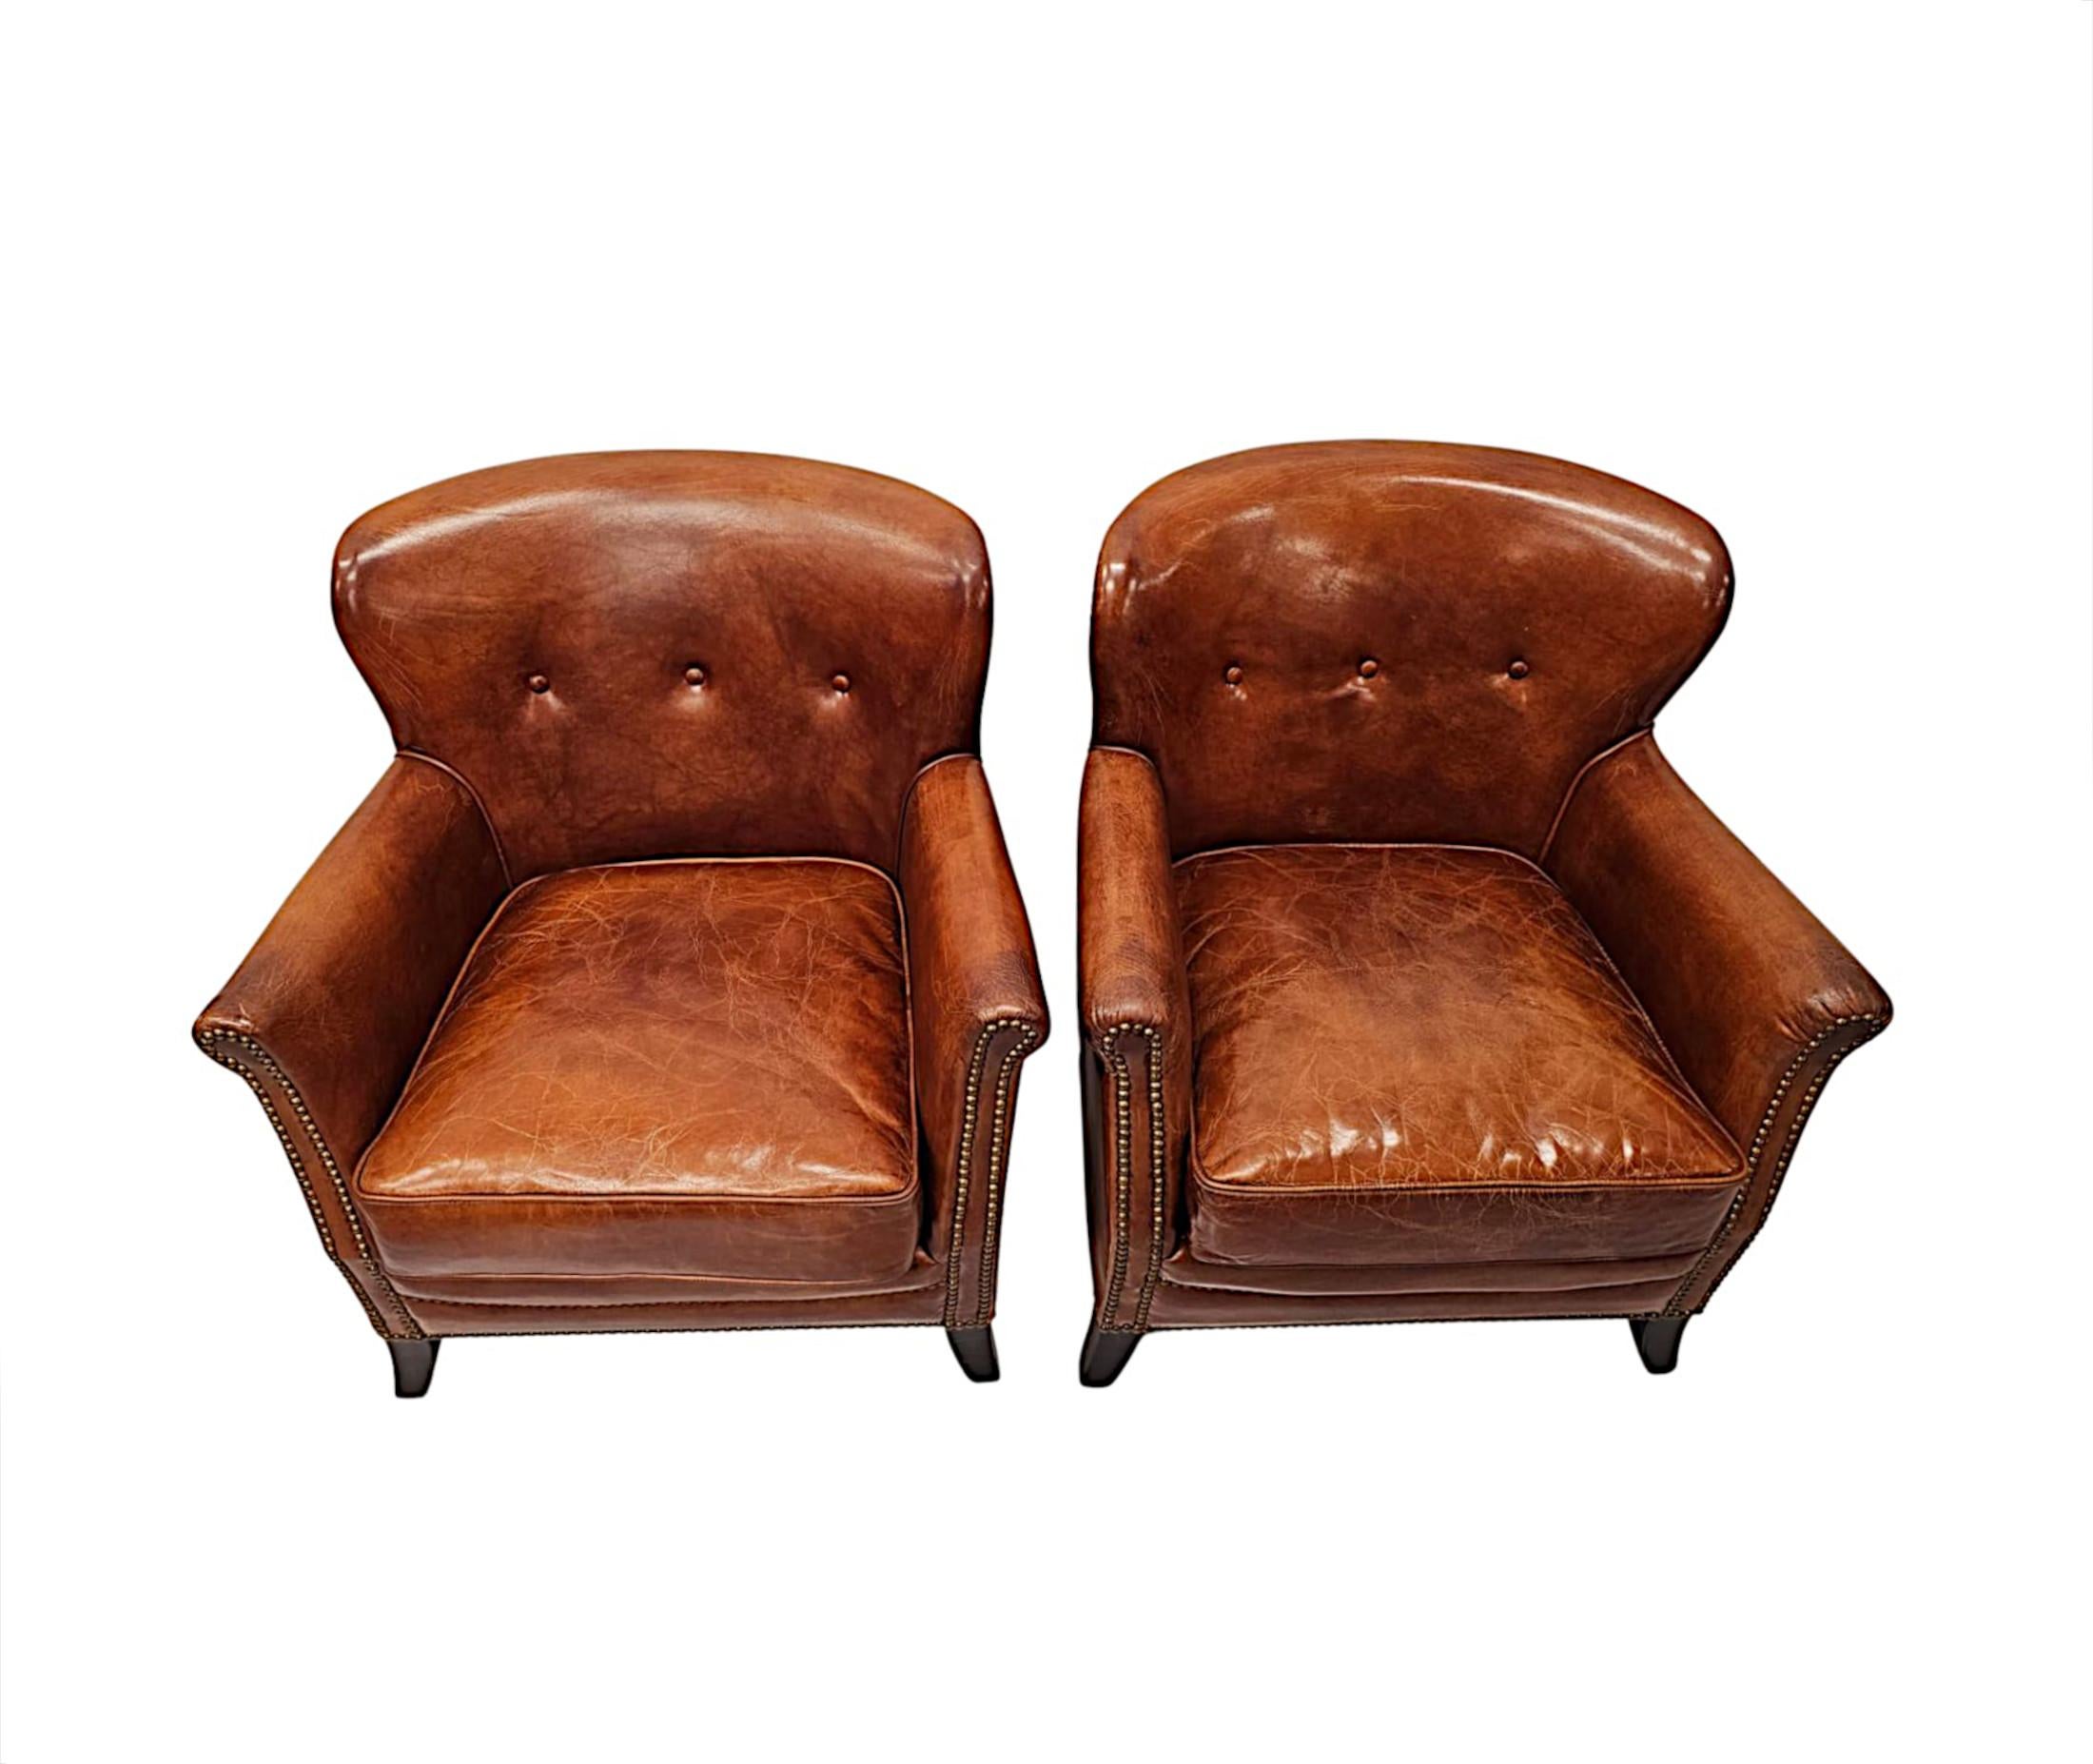 Contemporary A Stunning Pair of Small Leather Club Armchairs in the Art Deco Style 